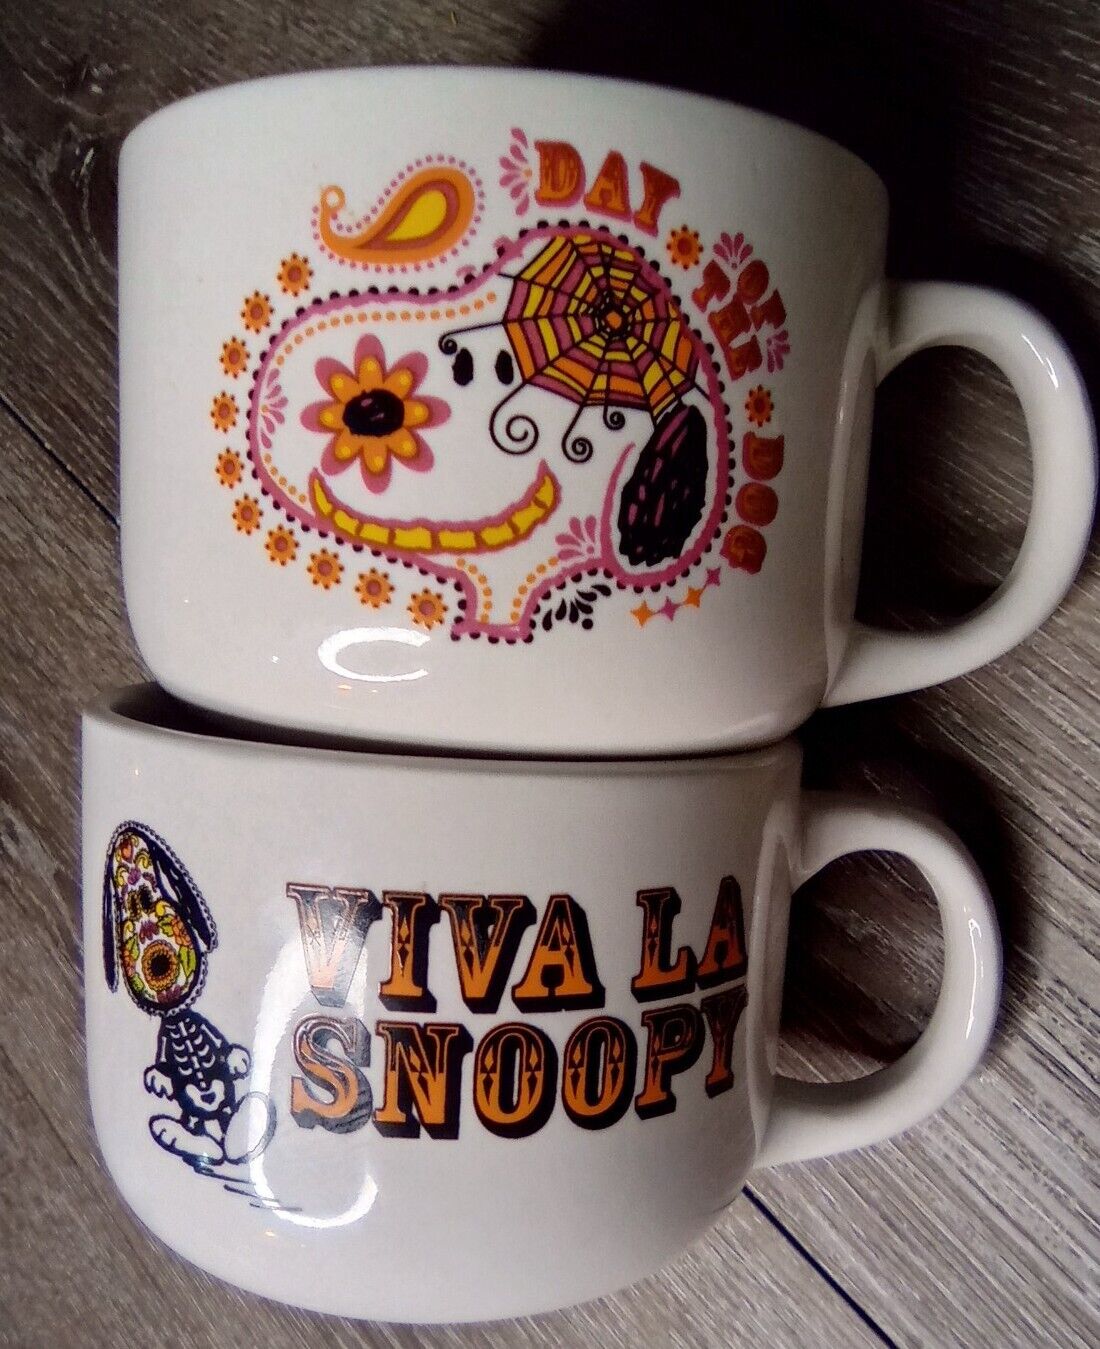 Peanuts Snoopy Day Of The Dog Viva La Snoopy. Day Of The Dead Large Mugs